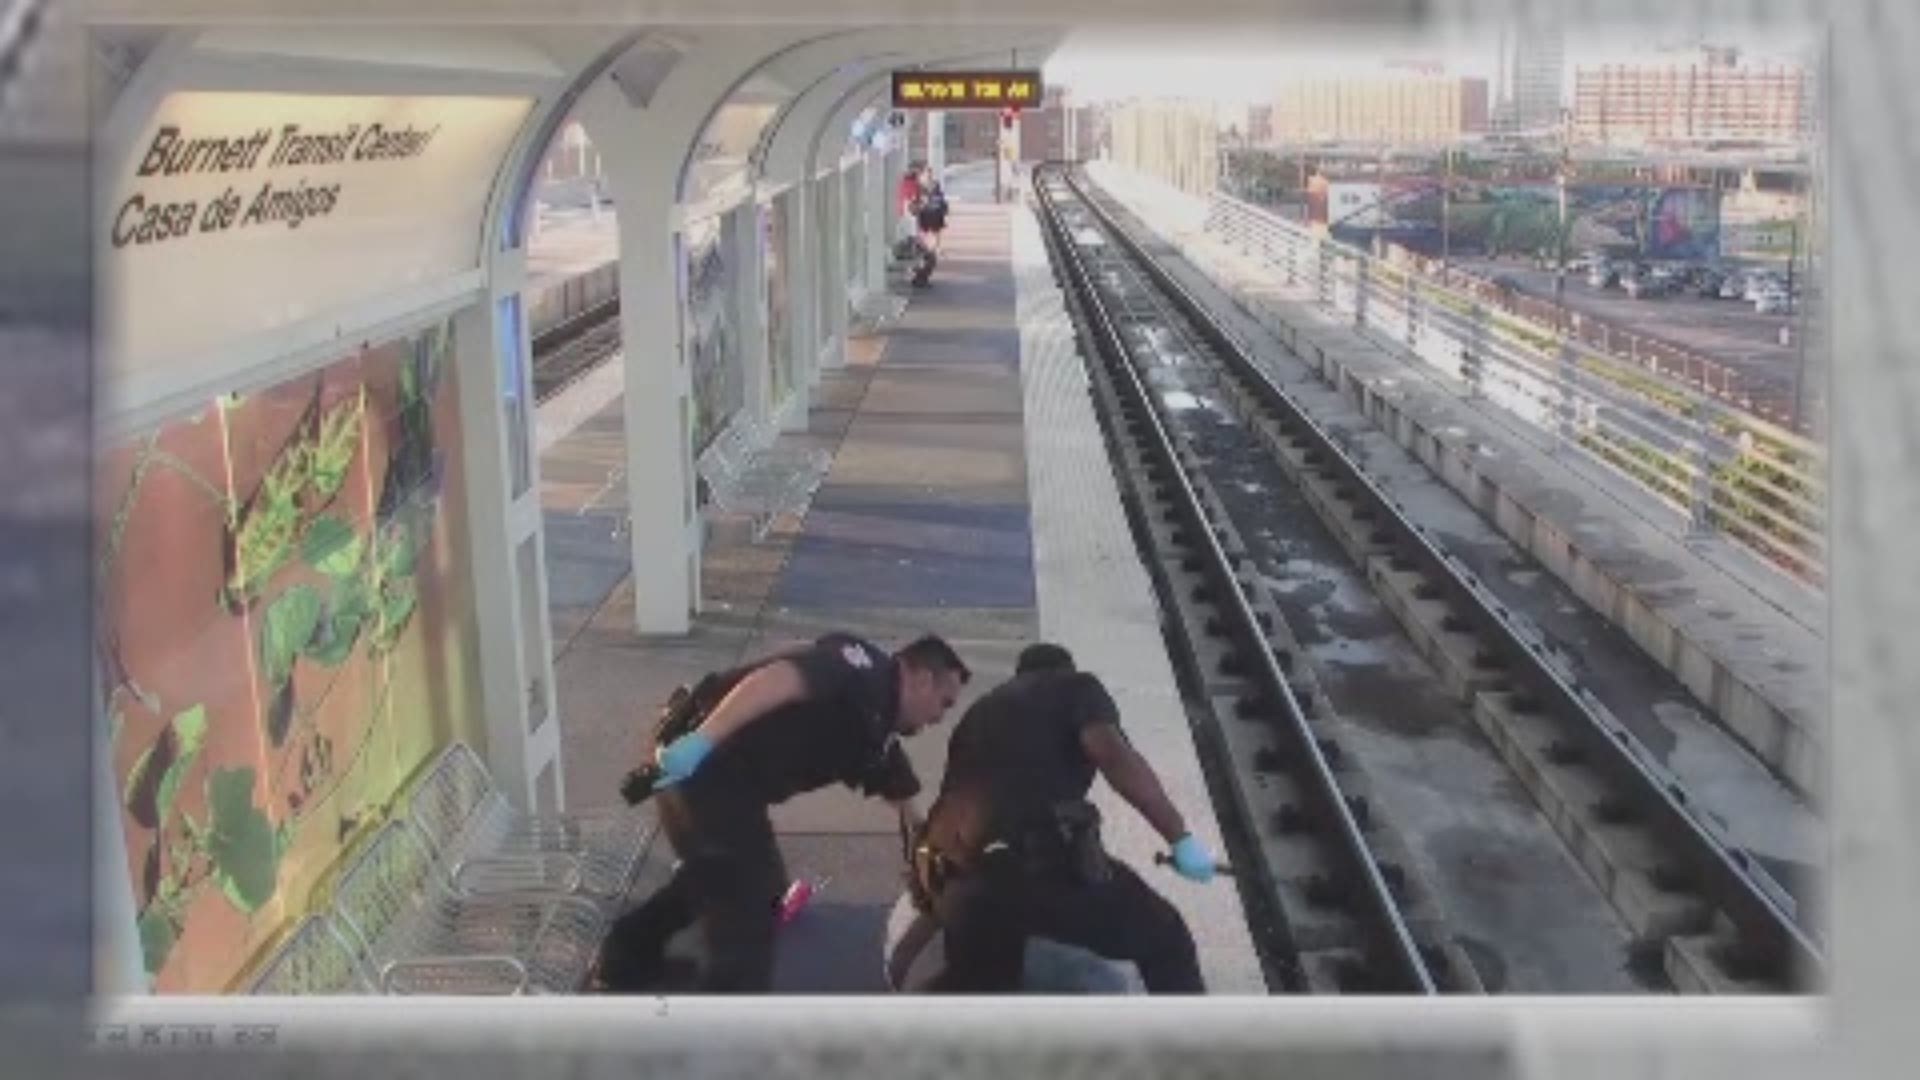 Metro police released disturbing video of two officers apparently beating a man who had been sleeping on a light rail train platform.